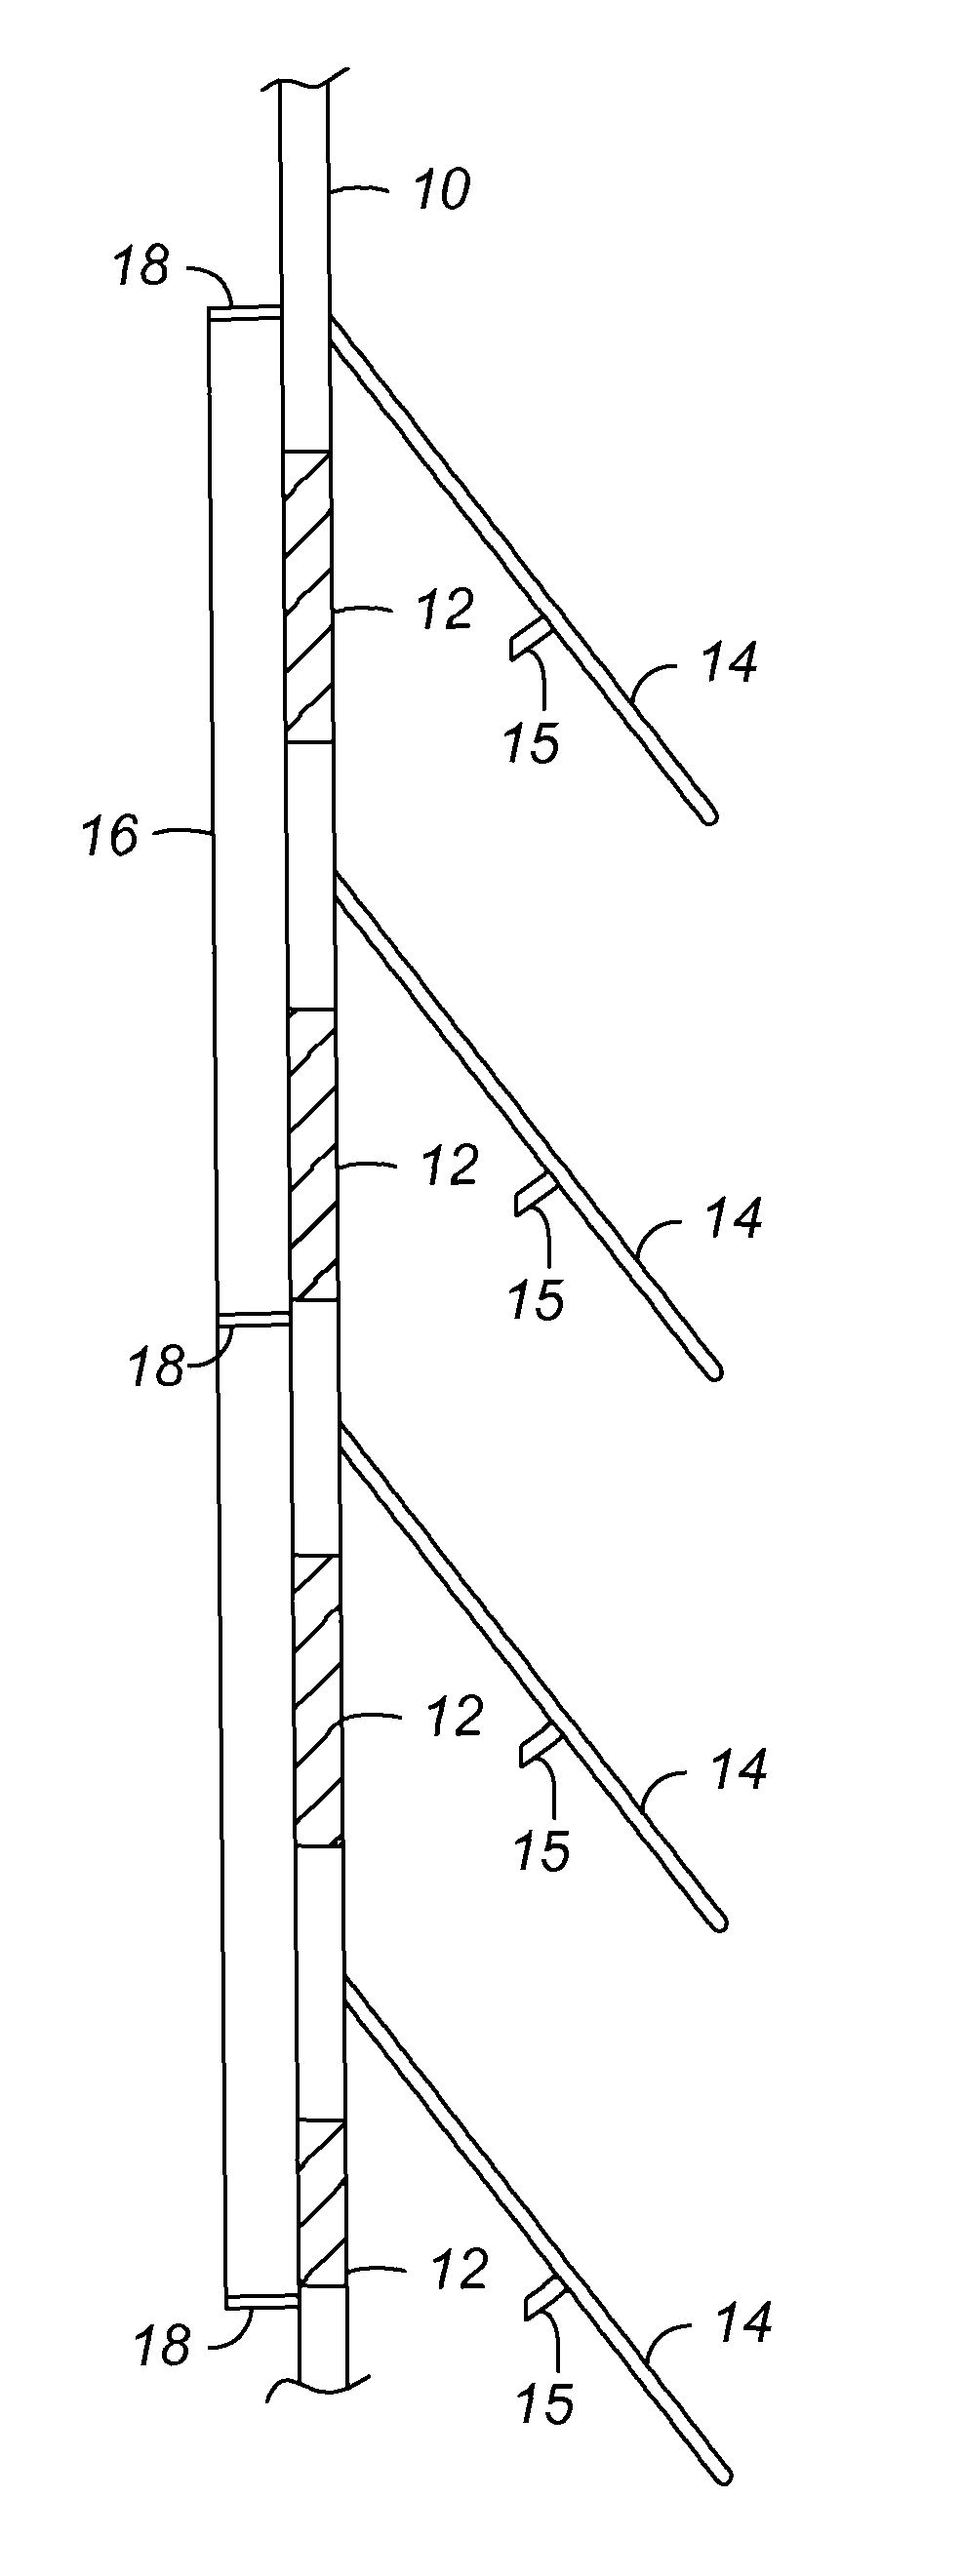 Secondary containment for a perforated plate